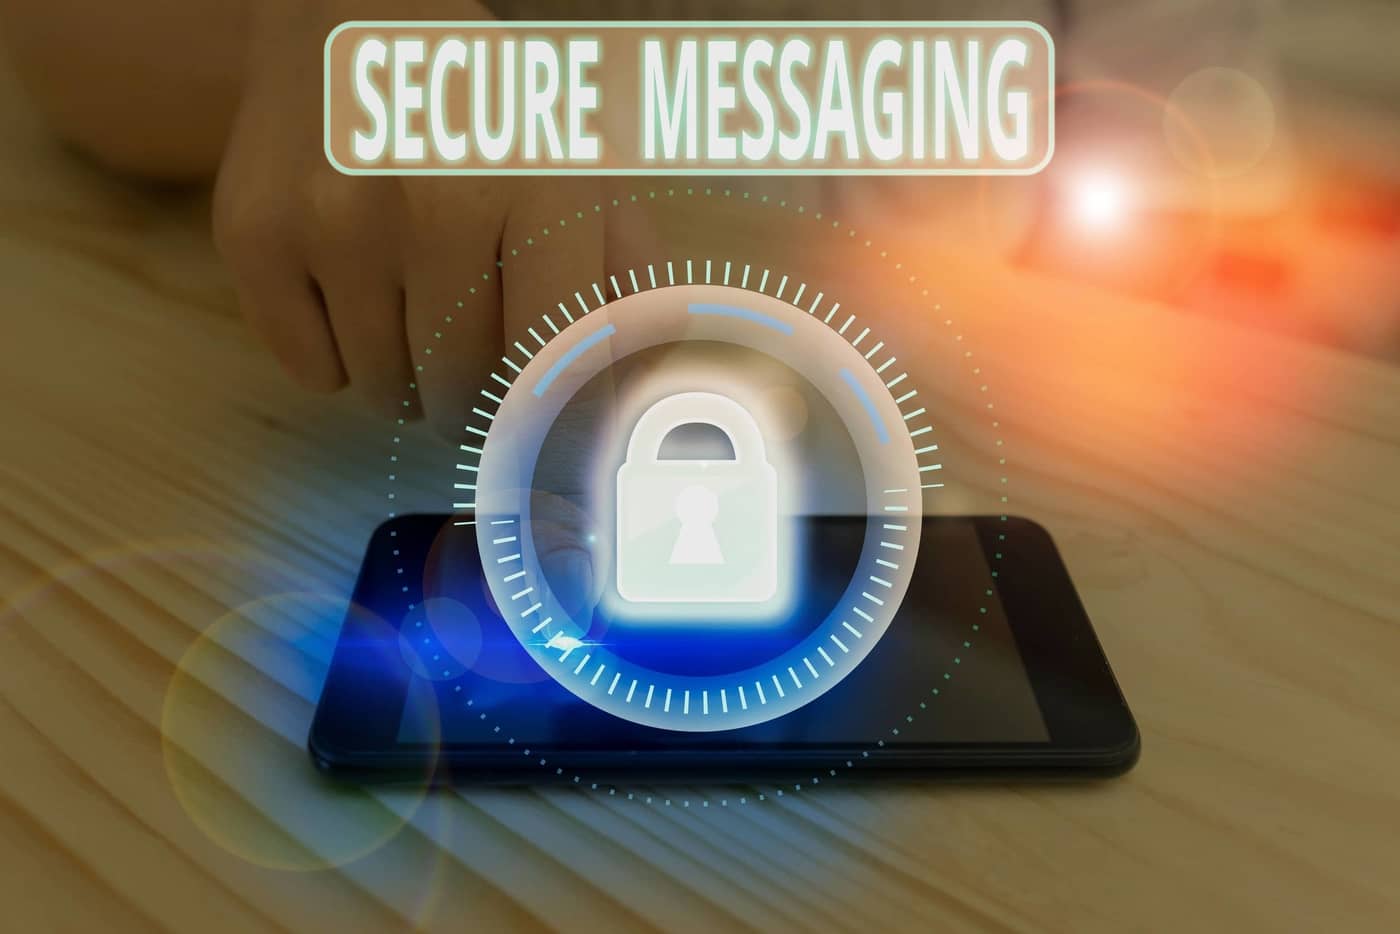 Whats the most secure chat app?